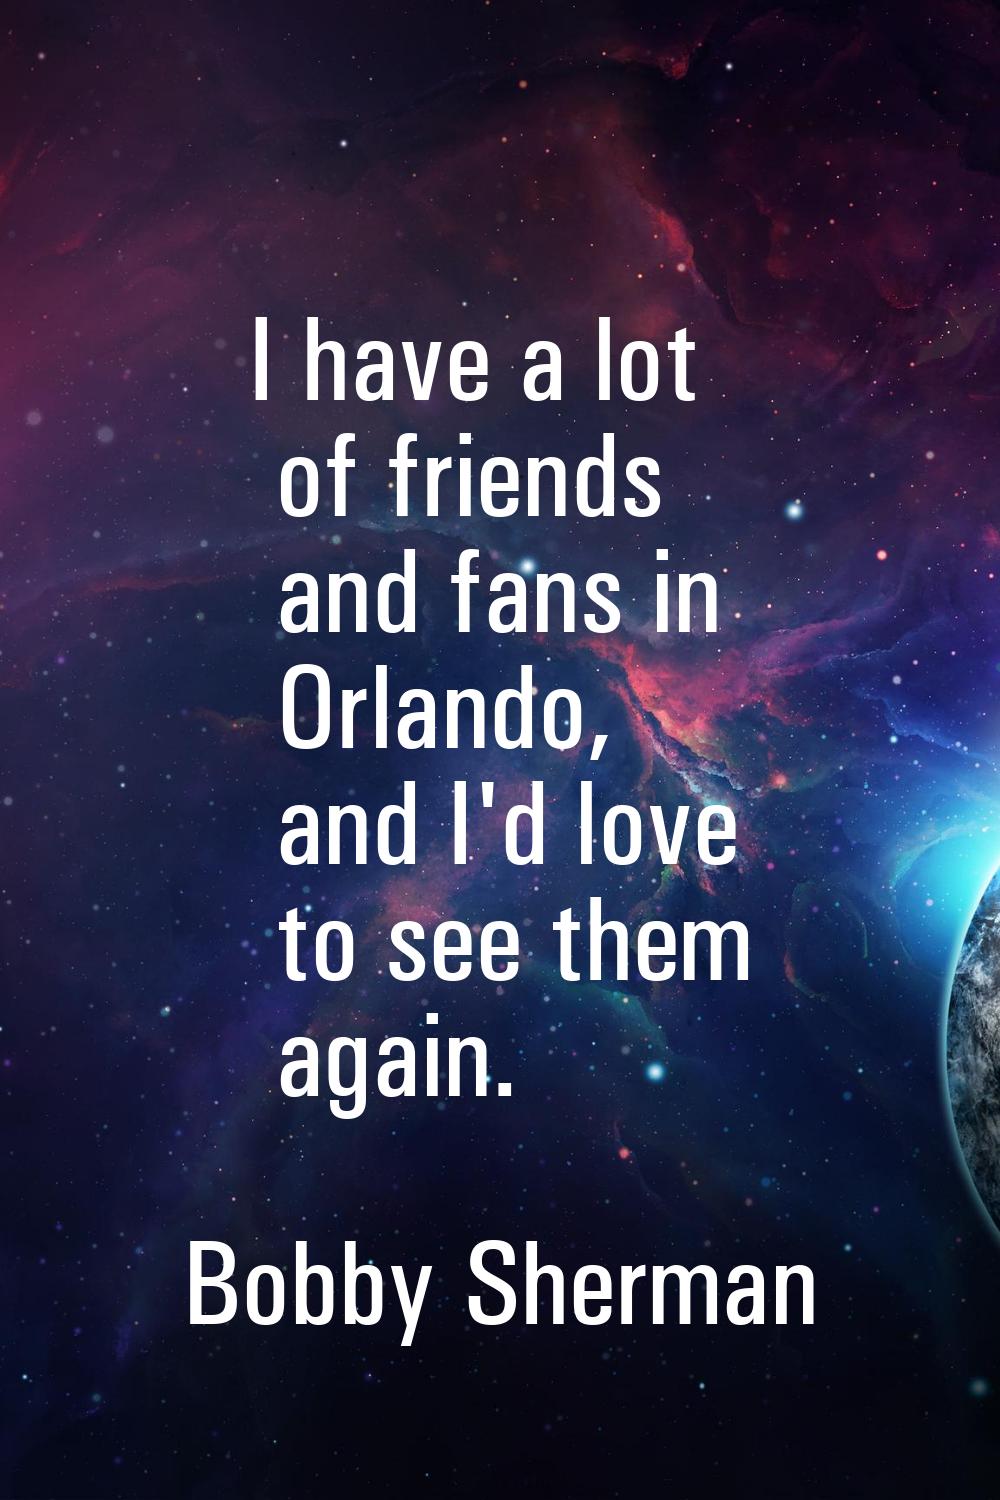 I have a lot of friends and fans in Orlando, and I'd love to see them again.